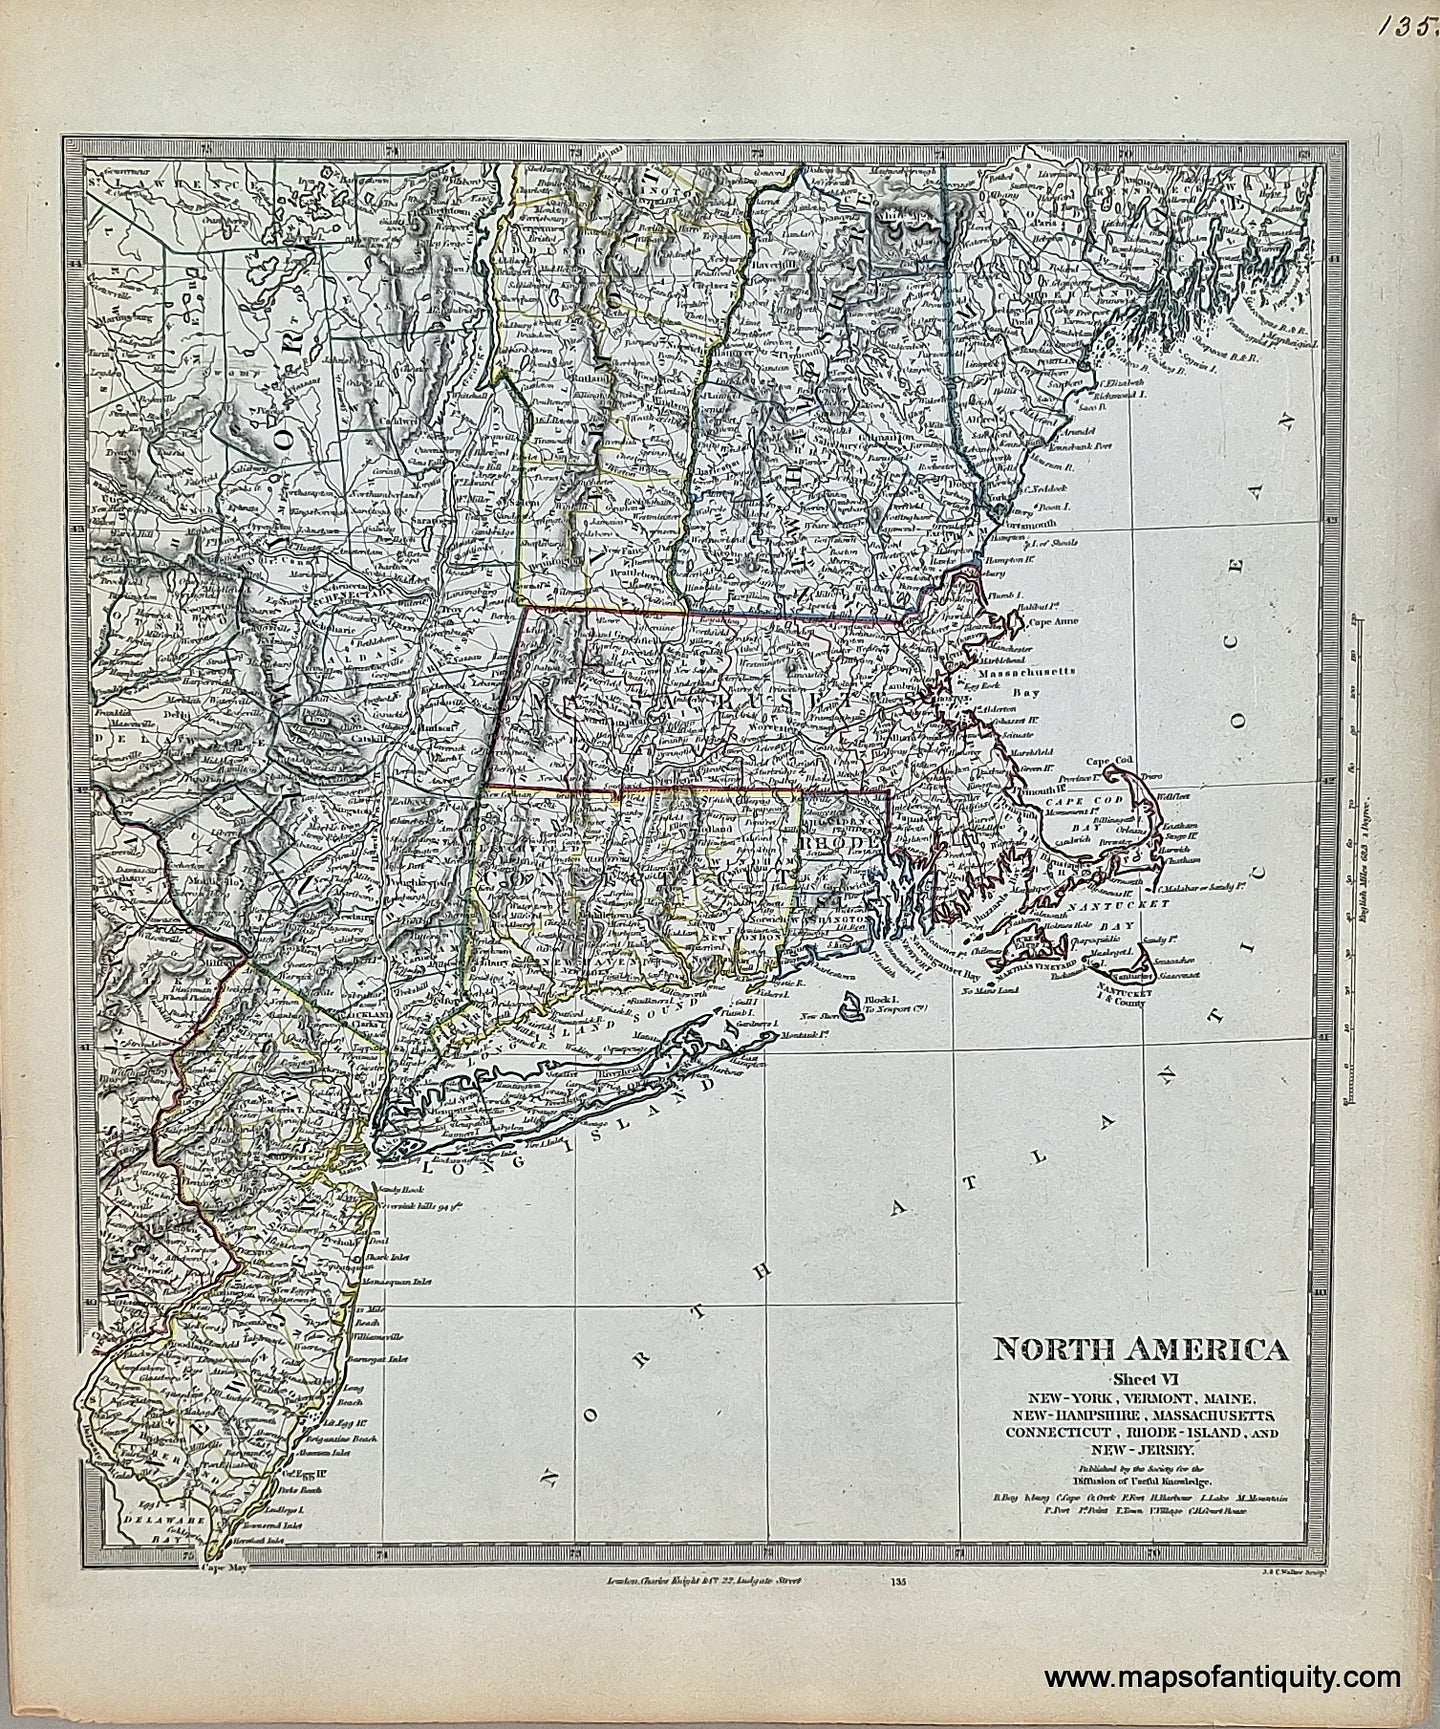 1850 - North America Sheet VI, New York, Vermont, Maine, New Hampshire, Massachusetts, Connecticut, Rhode Island, and New Jersey. - Antique Map